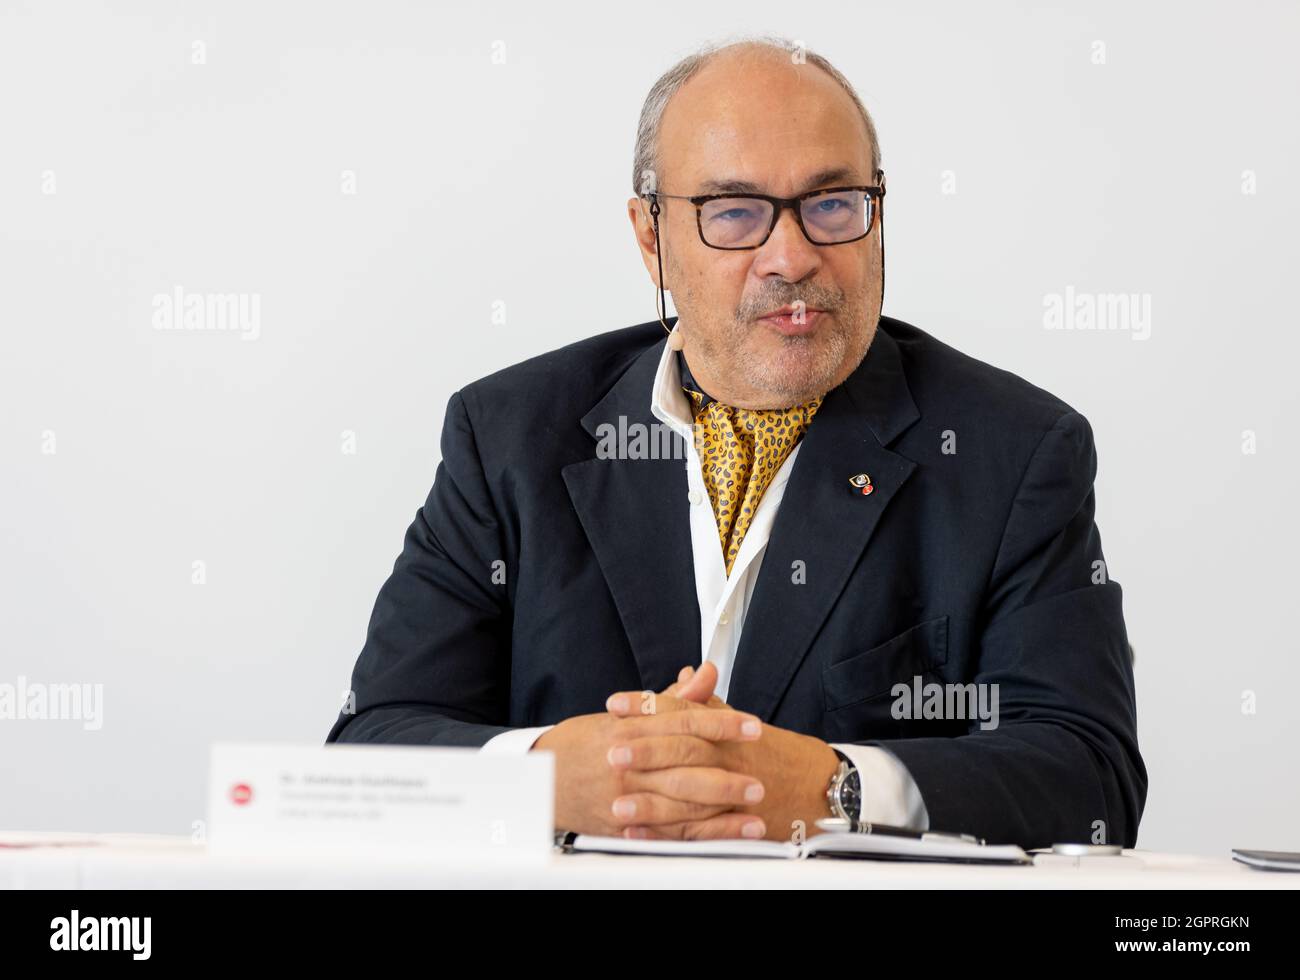 Dr. Andreas Kaufmann, current Chairman of the Supervisory Board of Leica Camera AG, at the press conference for the reopening of the Ernst Leitz Museum next to the Leica Camera AG headquarter in Wetzlar, Germany, 30th September, 2021. Credit: Christian Lademann / LademannMedia Stock Photo